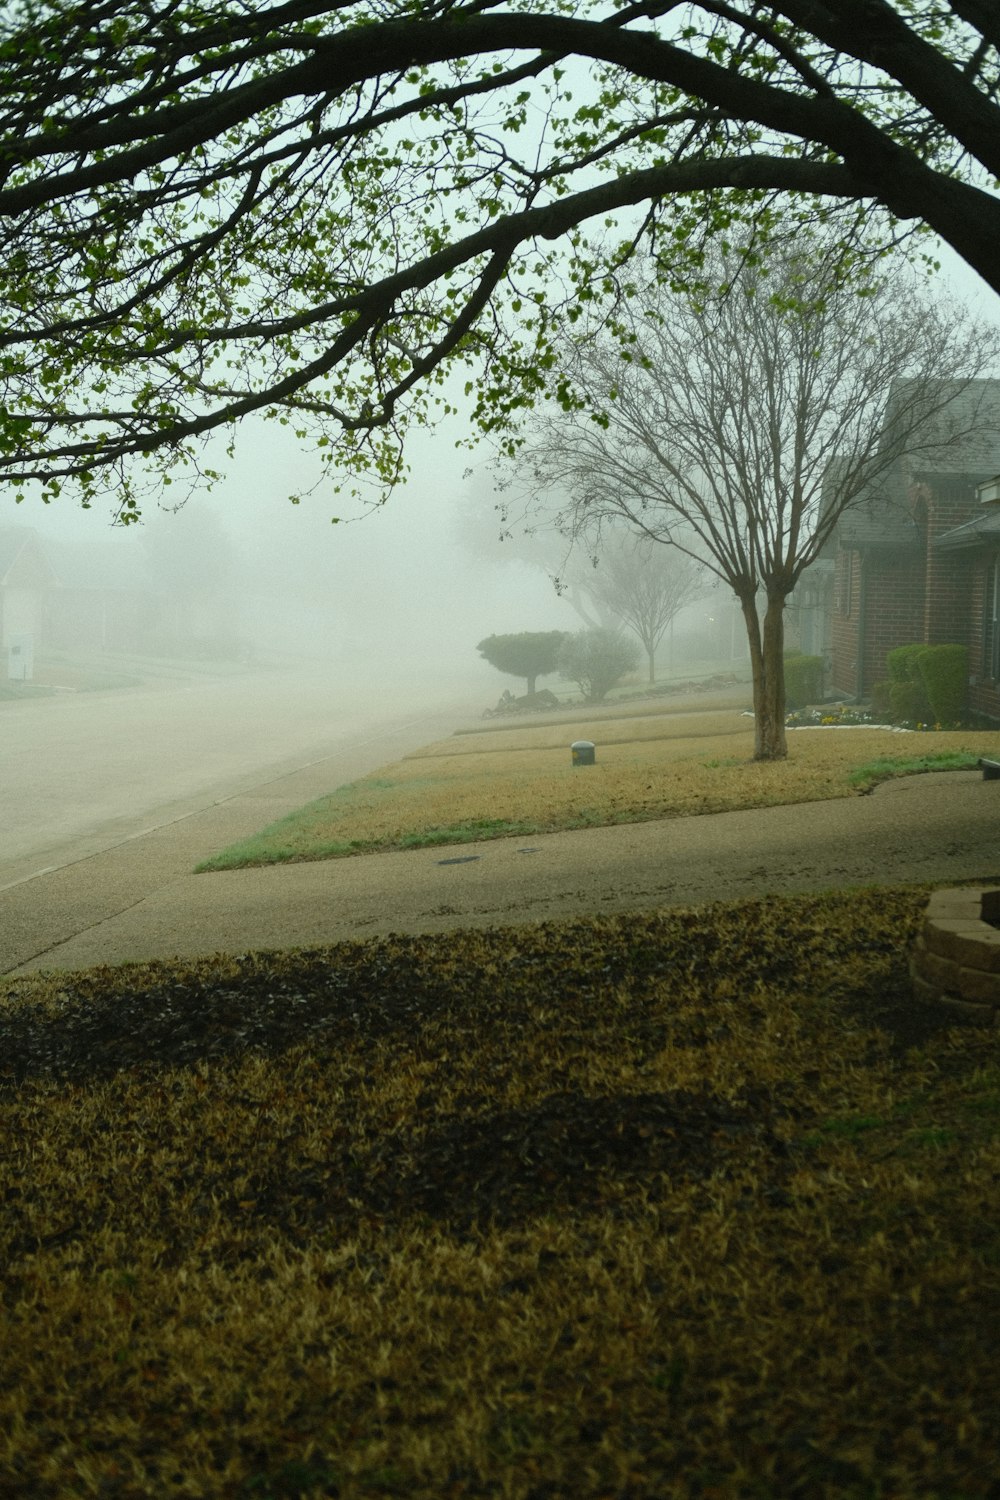 a foggy street with trees and a bench in the foreground